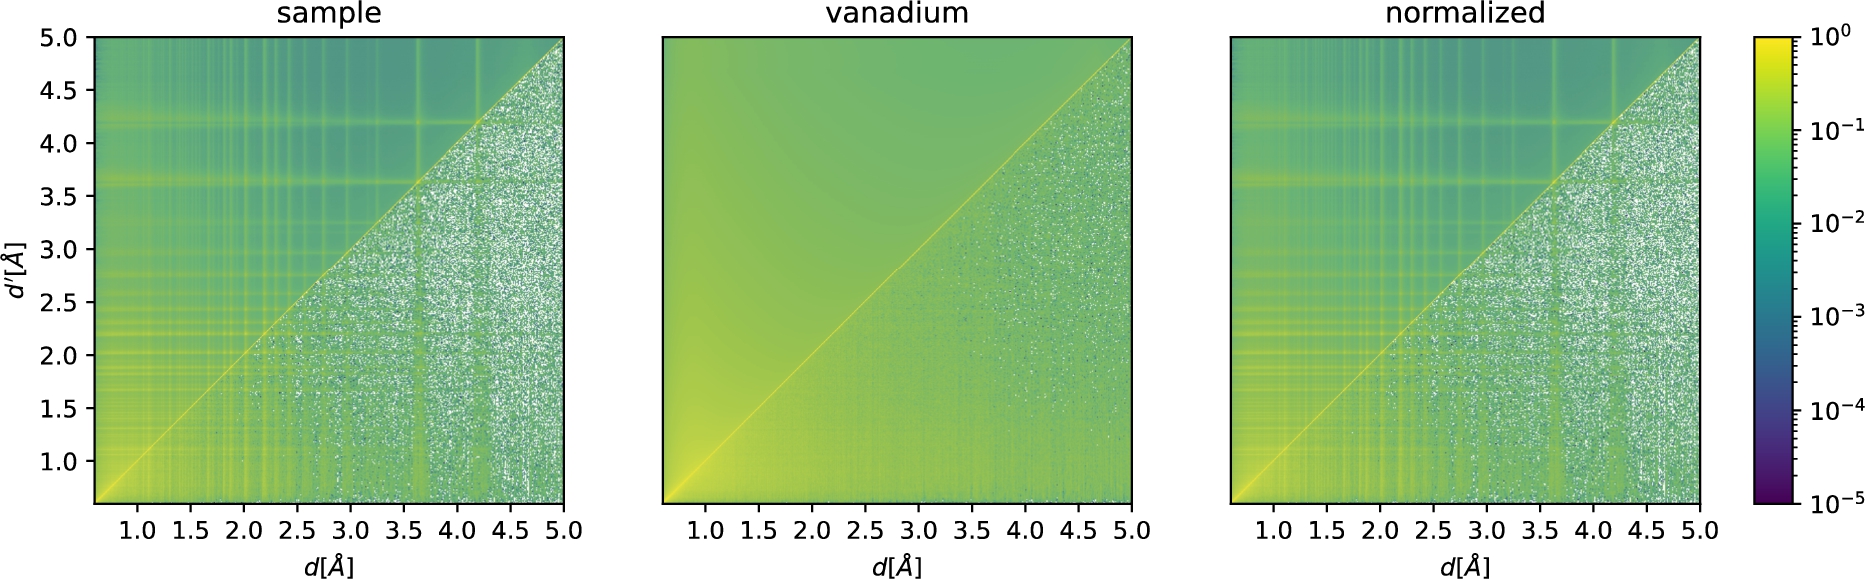 Correlation matrices for a powder-reduction workflow. We show the result for the sample S (left, α=10·αactualsample=22.3), vanadium V (center, α=10·αactualvanadium=47.0), and the normalized P=S/V (right). As the correlation matrices ΣS, ΣV, and ΣP are symmetric under d↔d′, we can show in the same figure the analytical result (above the diagonal) and the bootstrap result (below the diagonal). For improved readability, the plots have a limited d-spacing range as there are few further features for higher d. Analog of Fig. 7 with a logarithmic color scale.